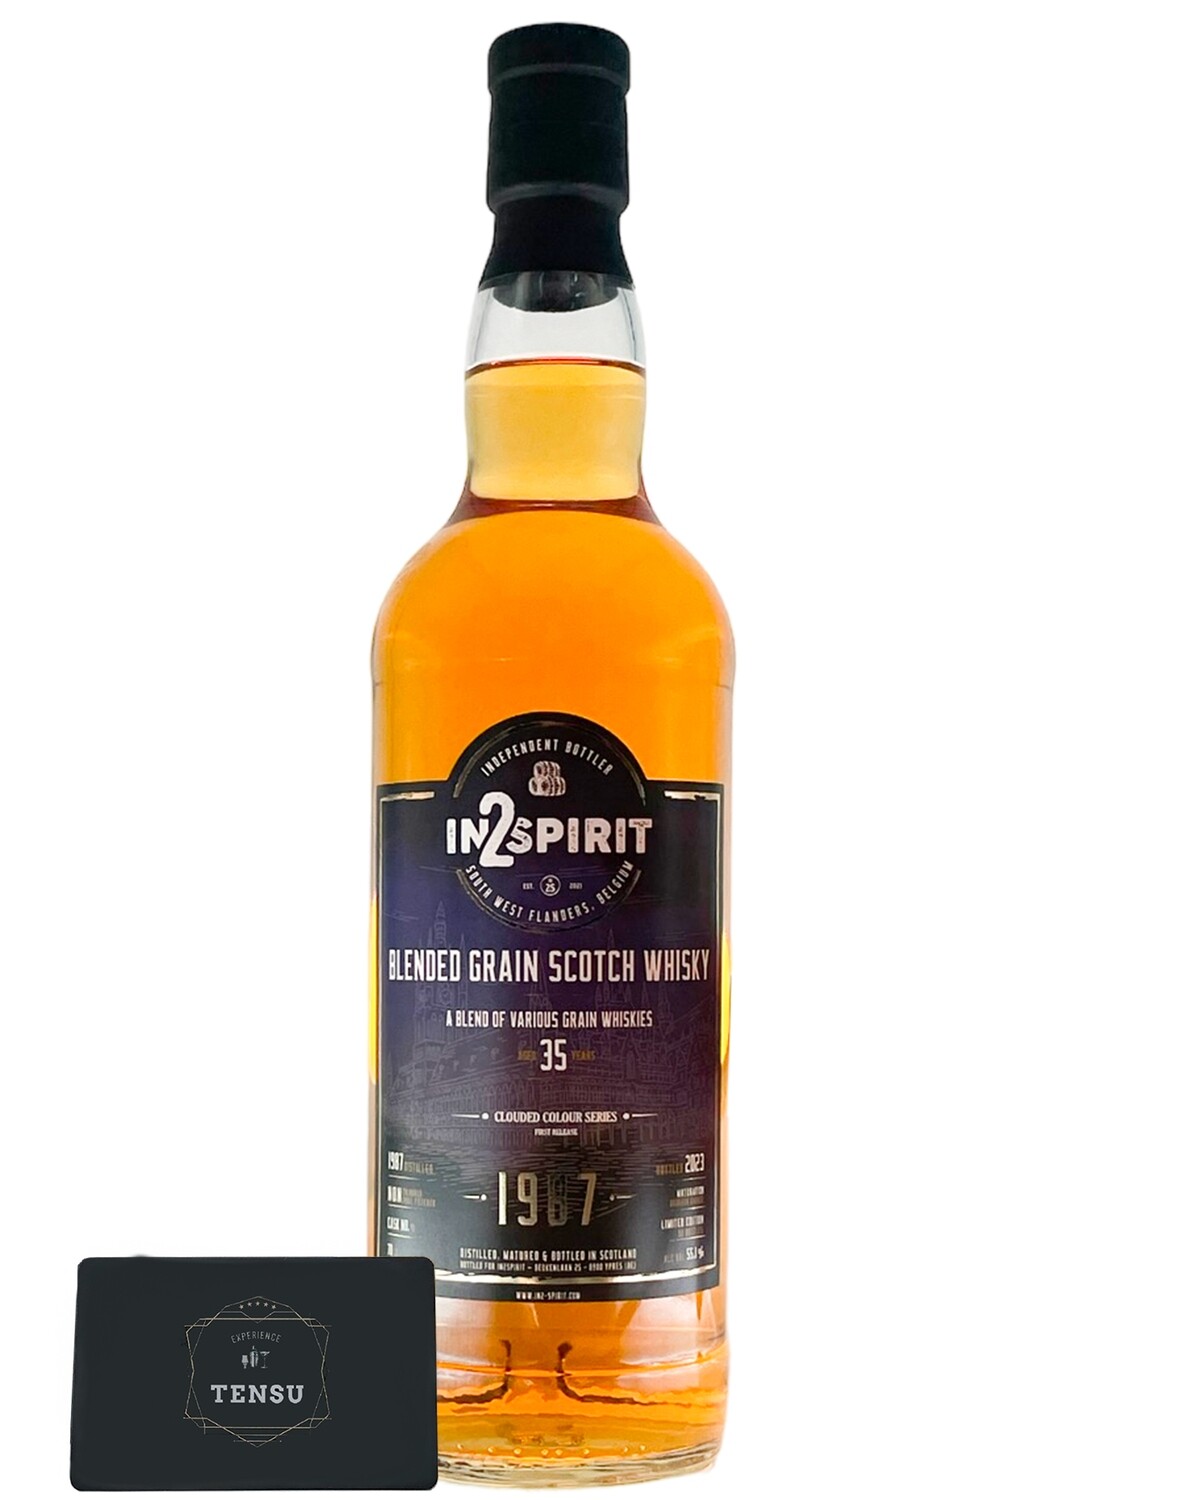 Blended Grain Scotch Whisky 35Y (1987-2023) Clouded Colour Series 1st Release 55.1 "In2Spirit"